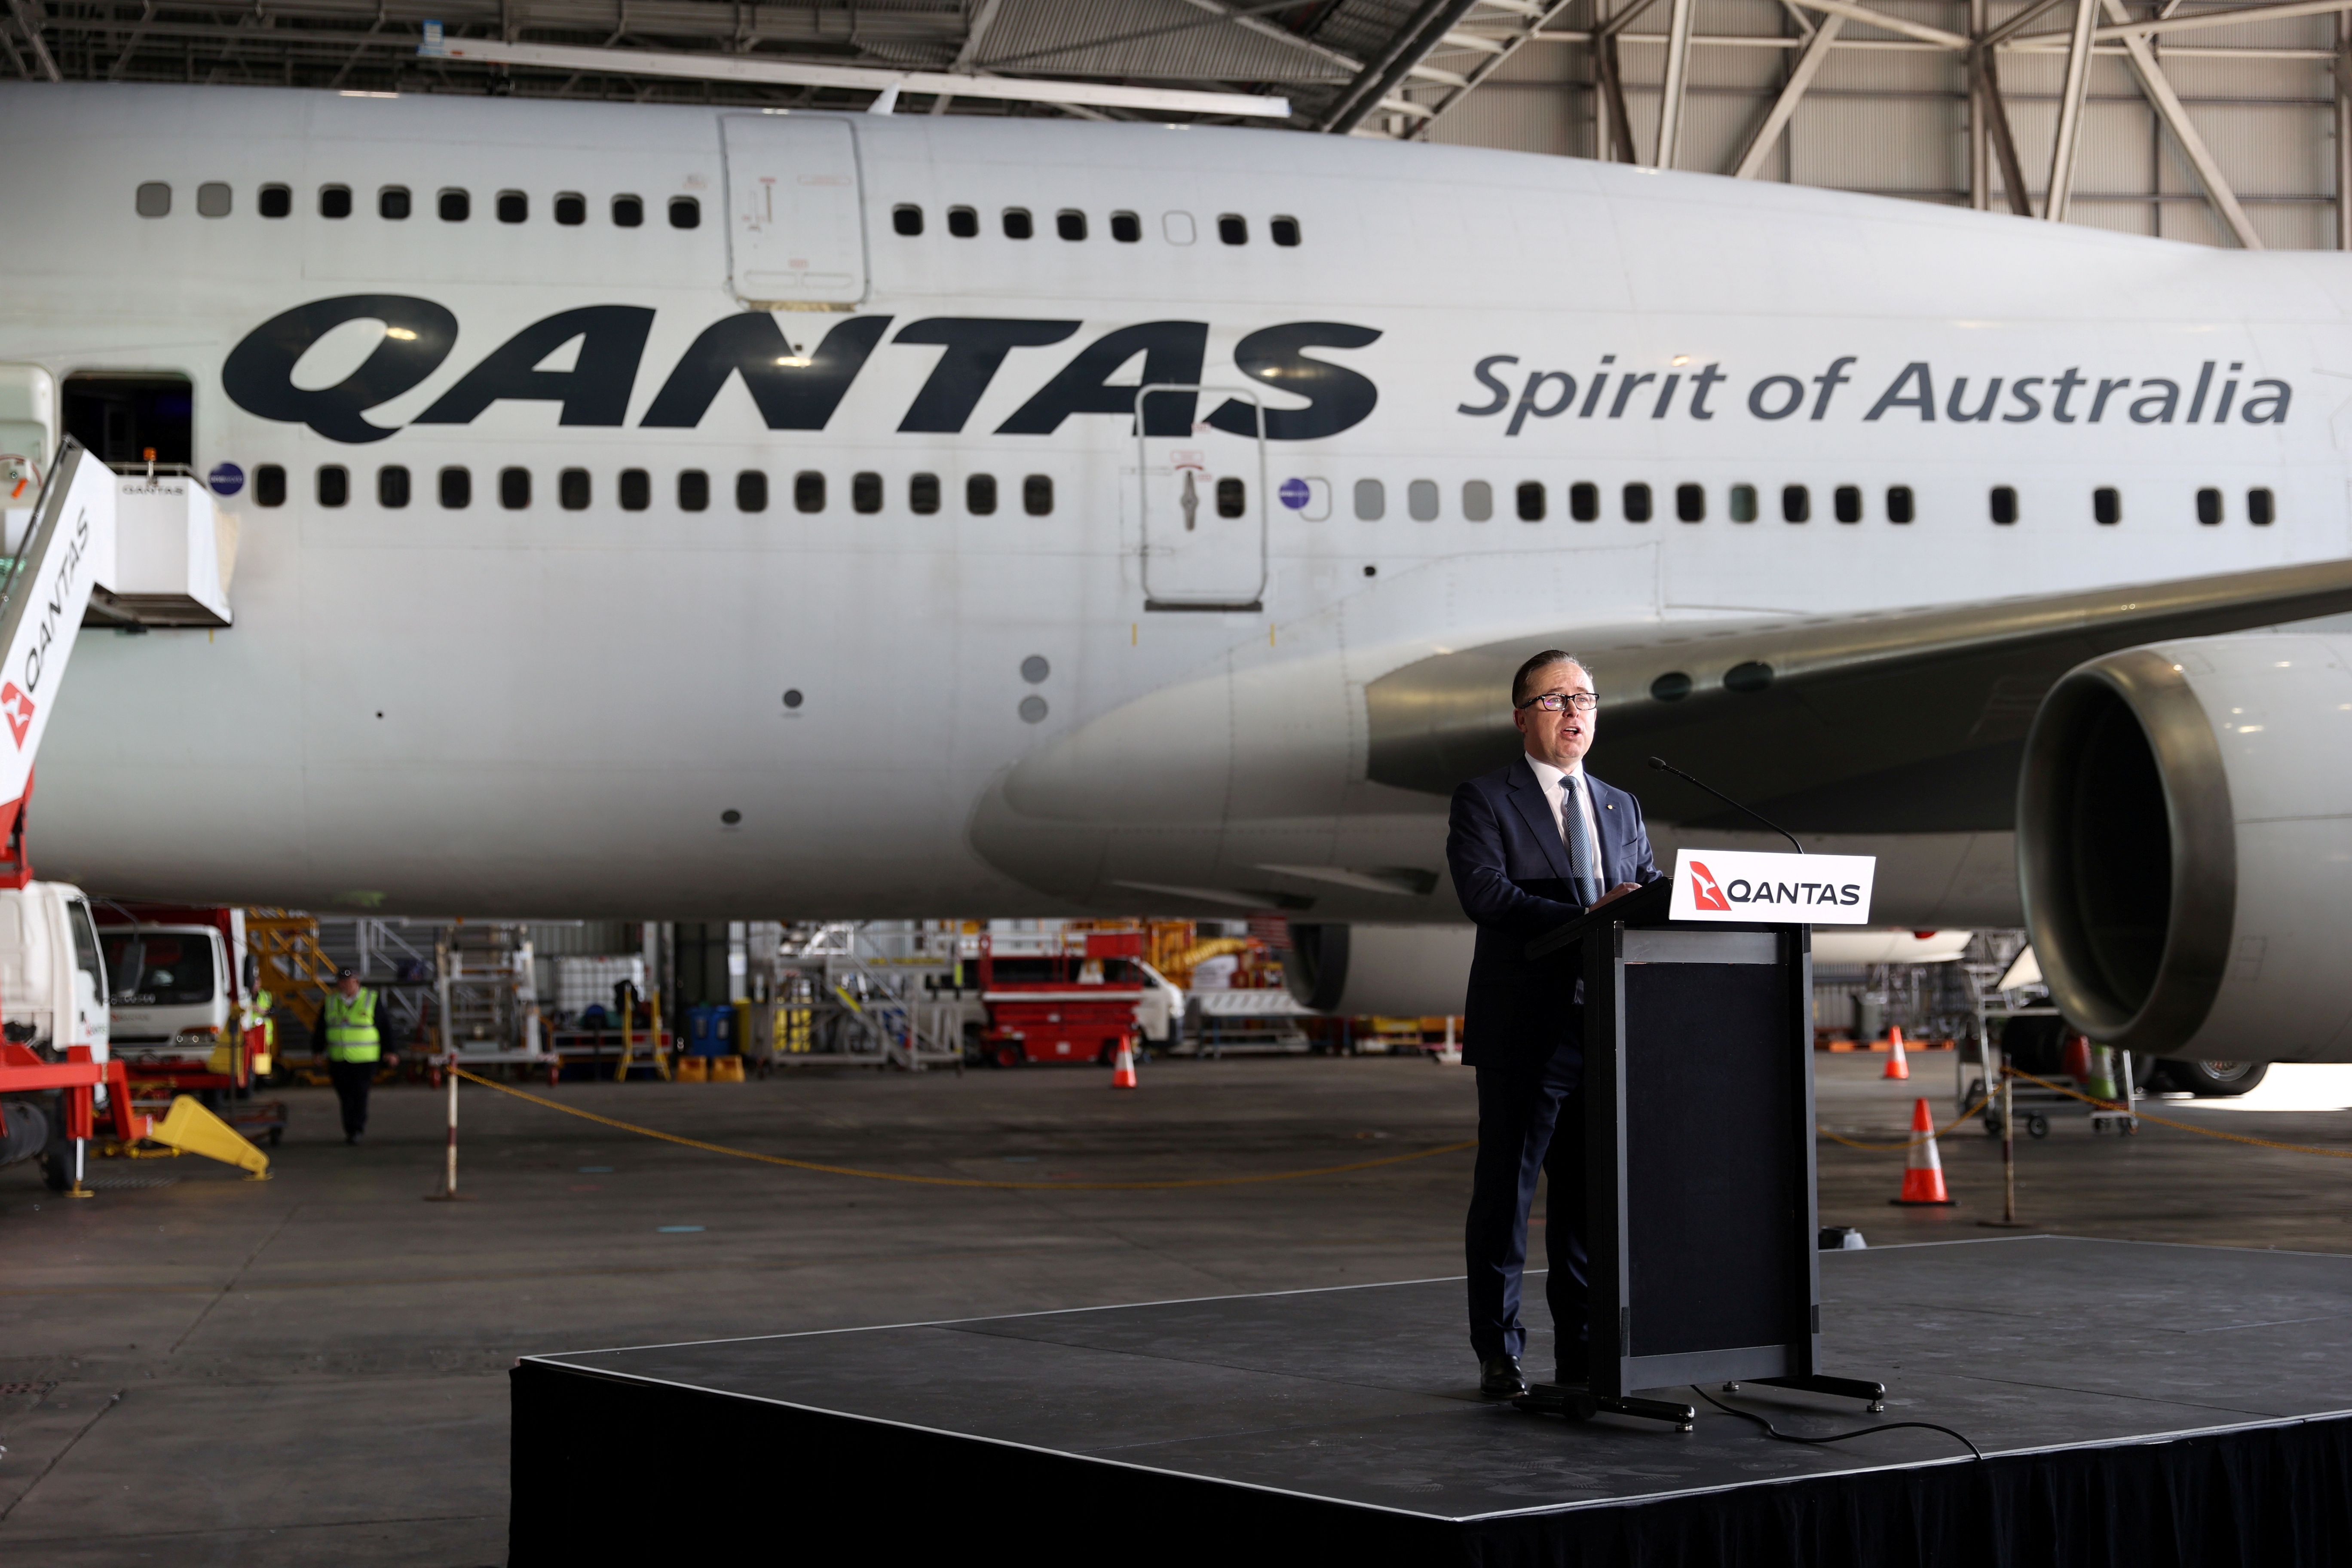 Qantas celebrates departure of last 747 jumbo jet from Sydney Airport, as it retires its remaining Boeing 747 planes early due to the coronavirus disease